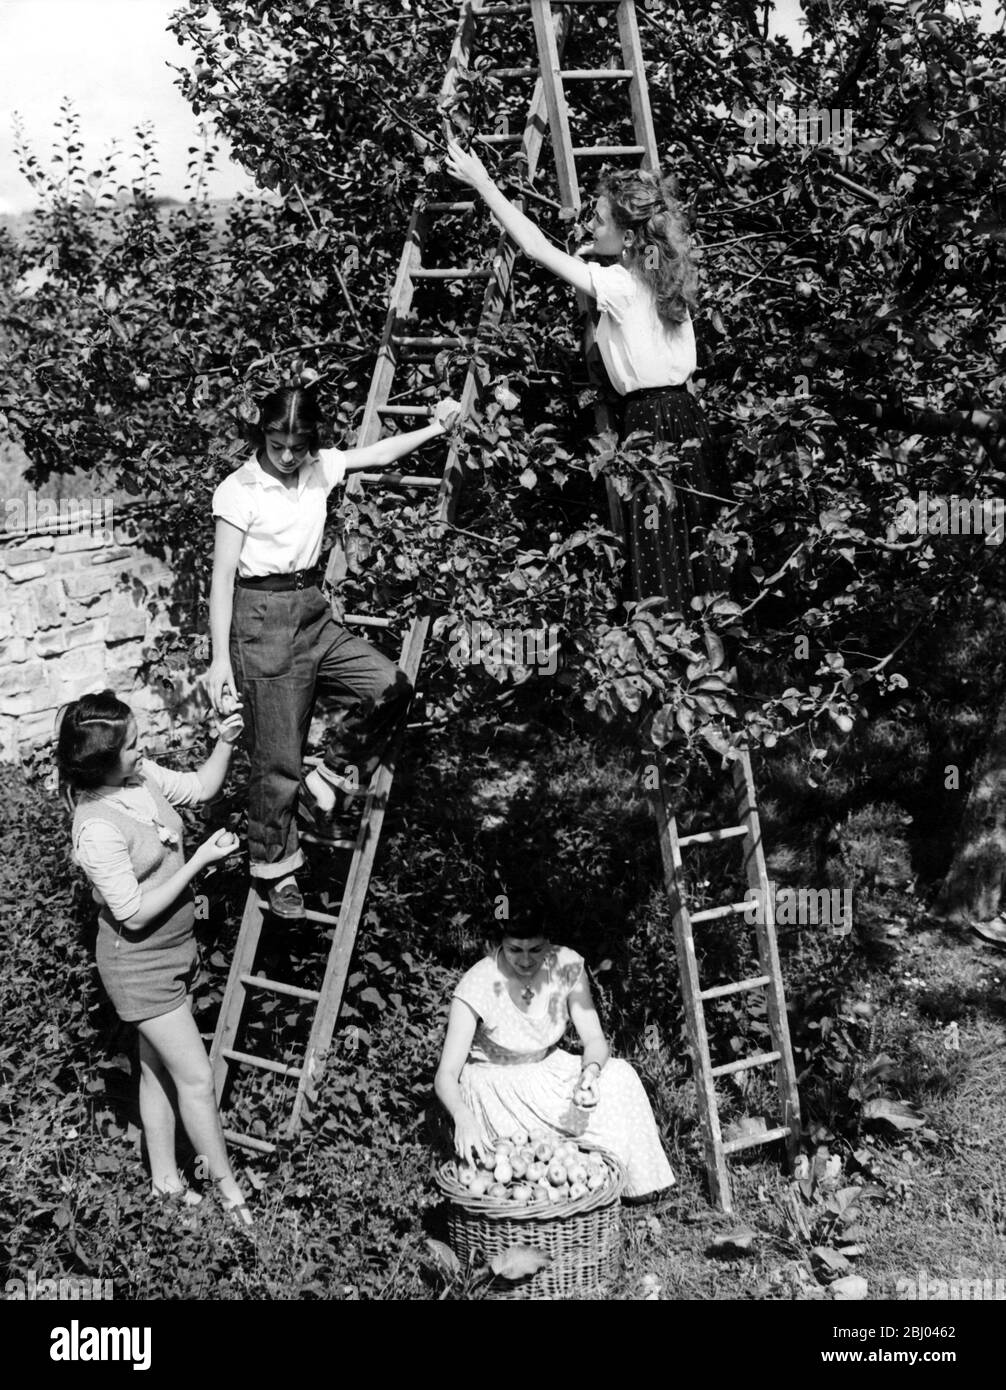 Students on a working holiday apple picking in an Essex Orchard. From left to right the girls are Gladys Kafka (16) from Czechoslovakia (in shorts); Linda Keen (16) from Wembley (on ladder); Jany Philip (27) from France (placing apples in basket) and Giselle Plauche (22) also from France (picking fruis fromladder). - 19th August 1953 Stock Photo